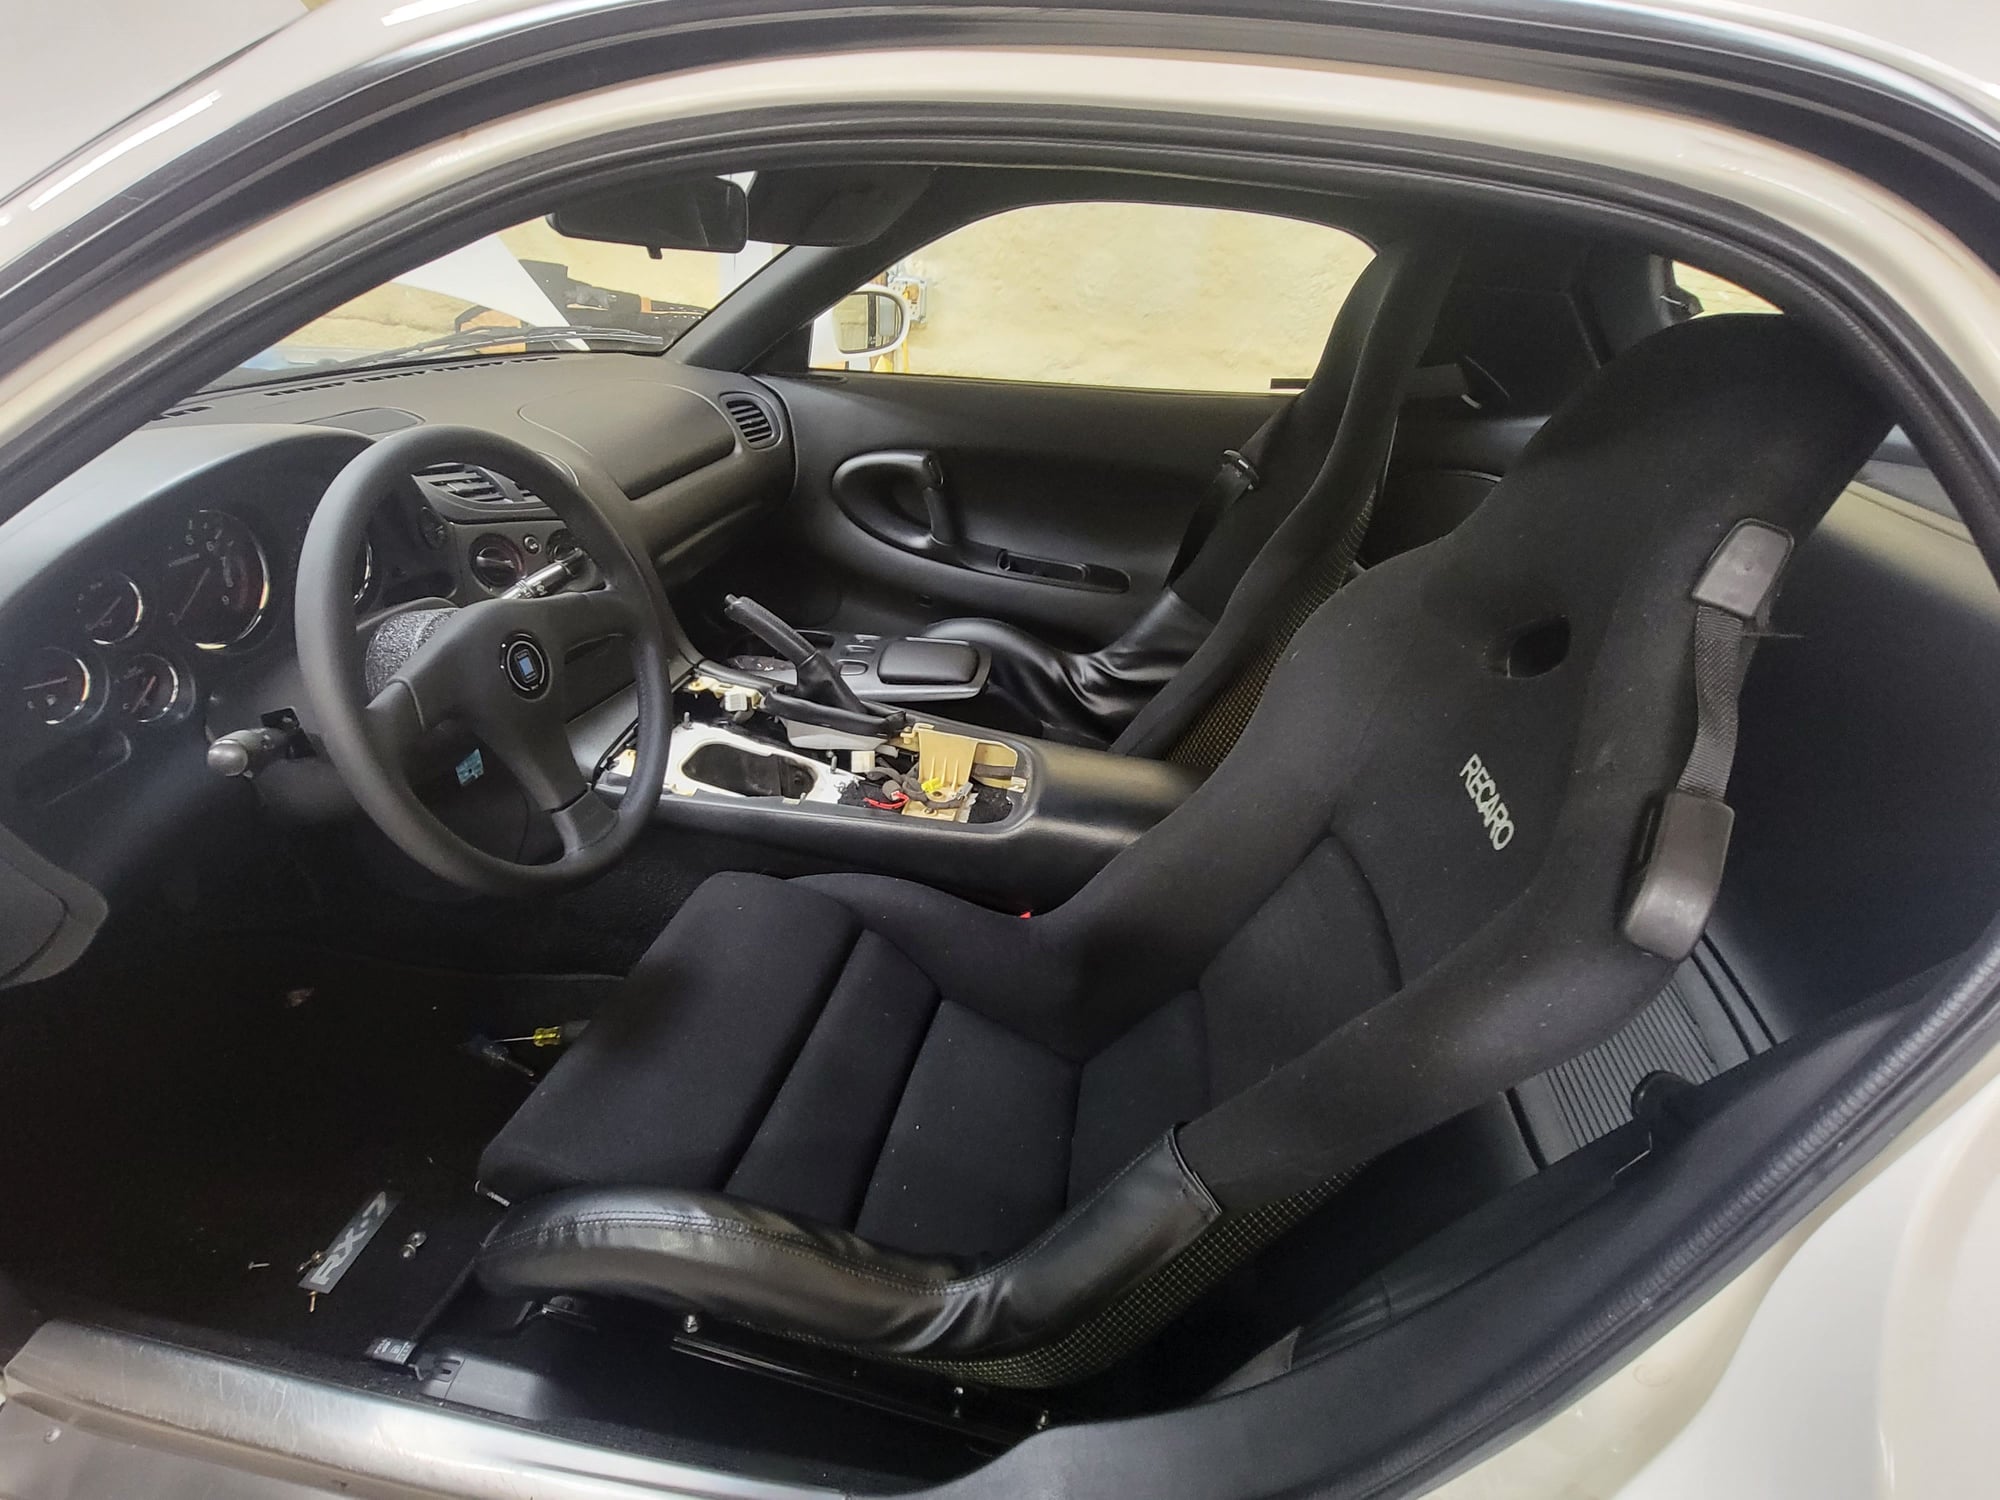 Interior/Upholstery - Angry Panda RZs, TILTWORX rails - New - 1986 to 2002 Mazda RX-7 - West Harrison, IN 47060, United States